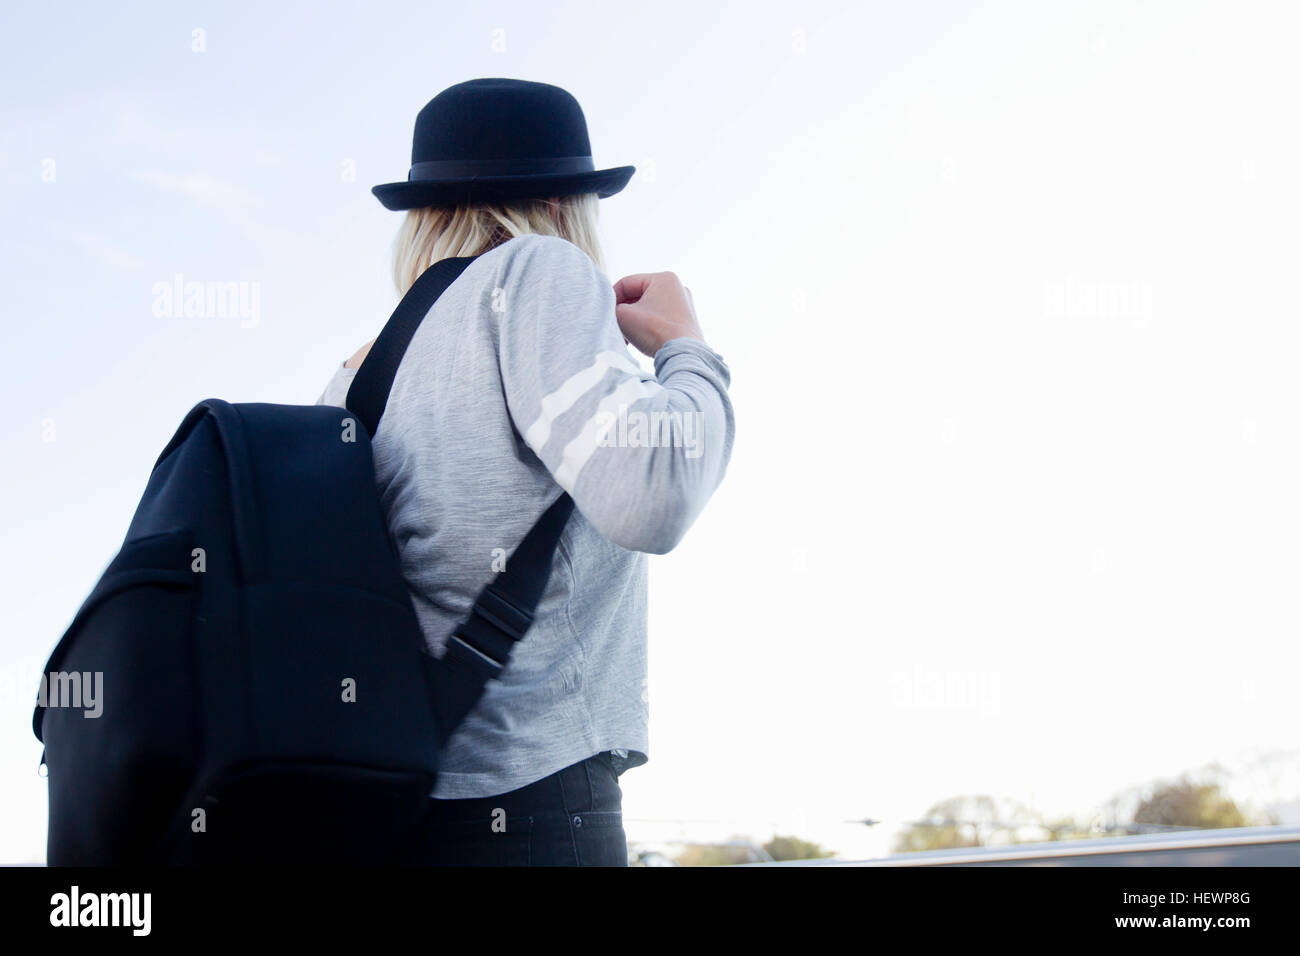 Rear view of woman wearing hat carrying backpack Stock Photo